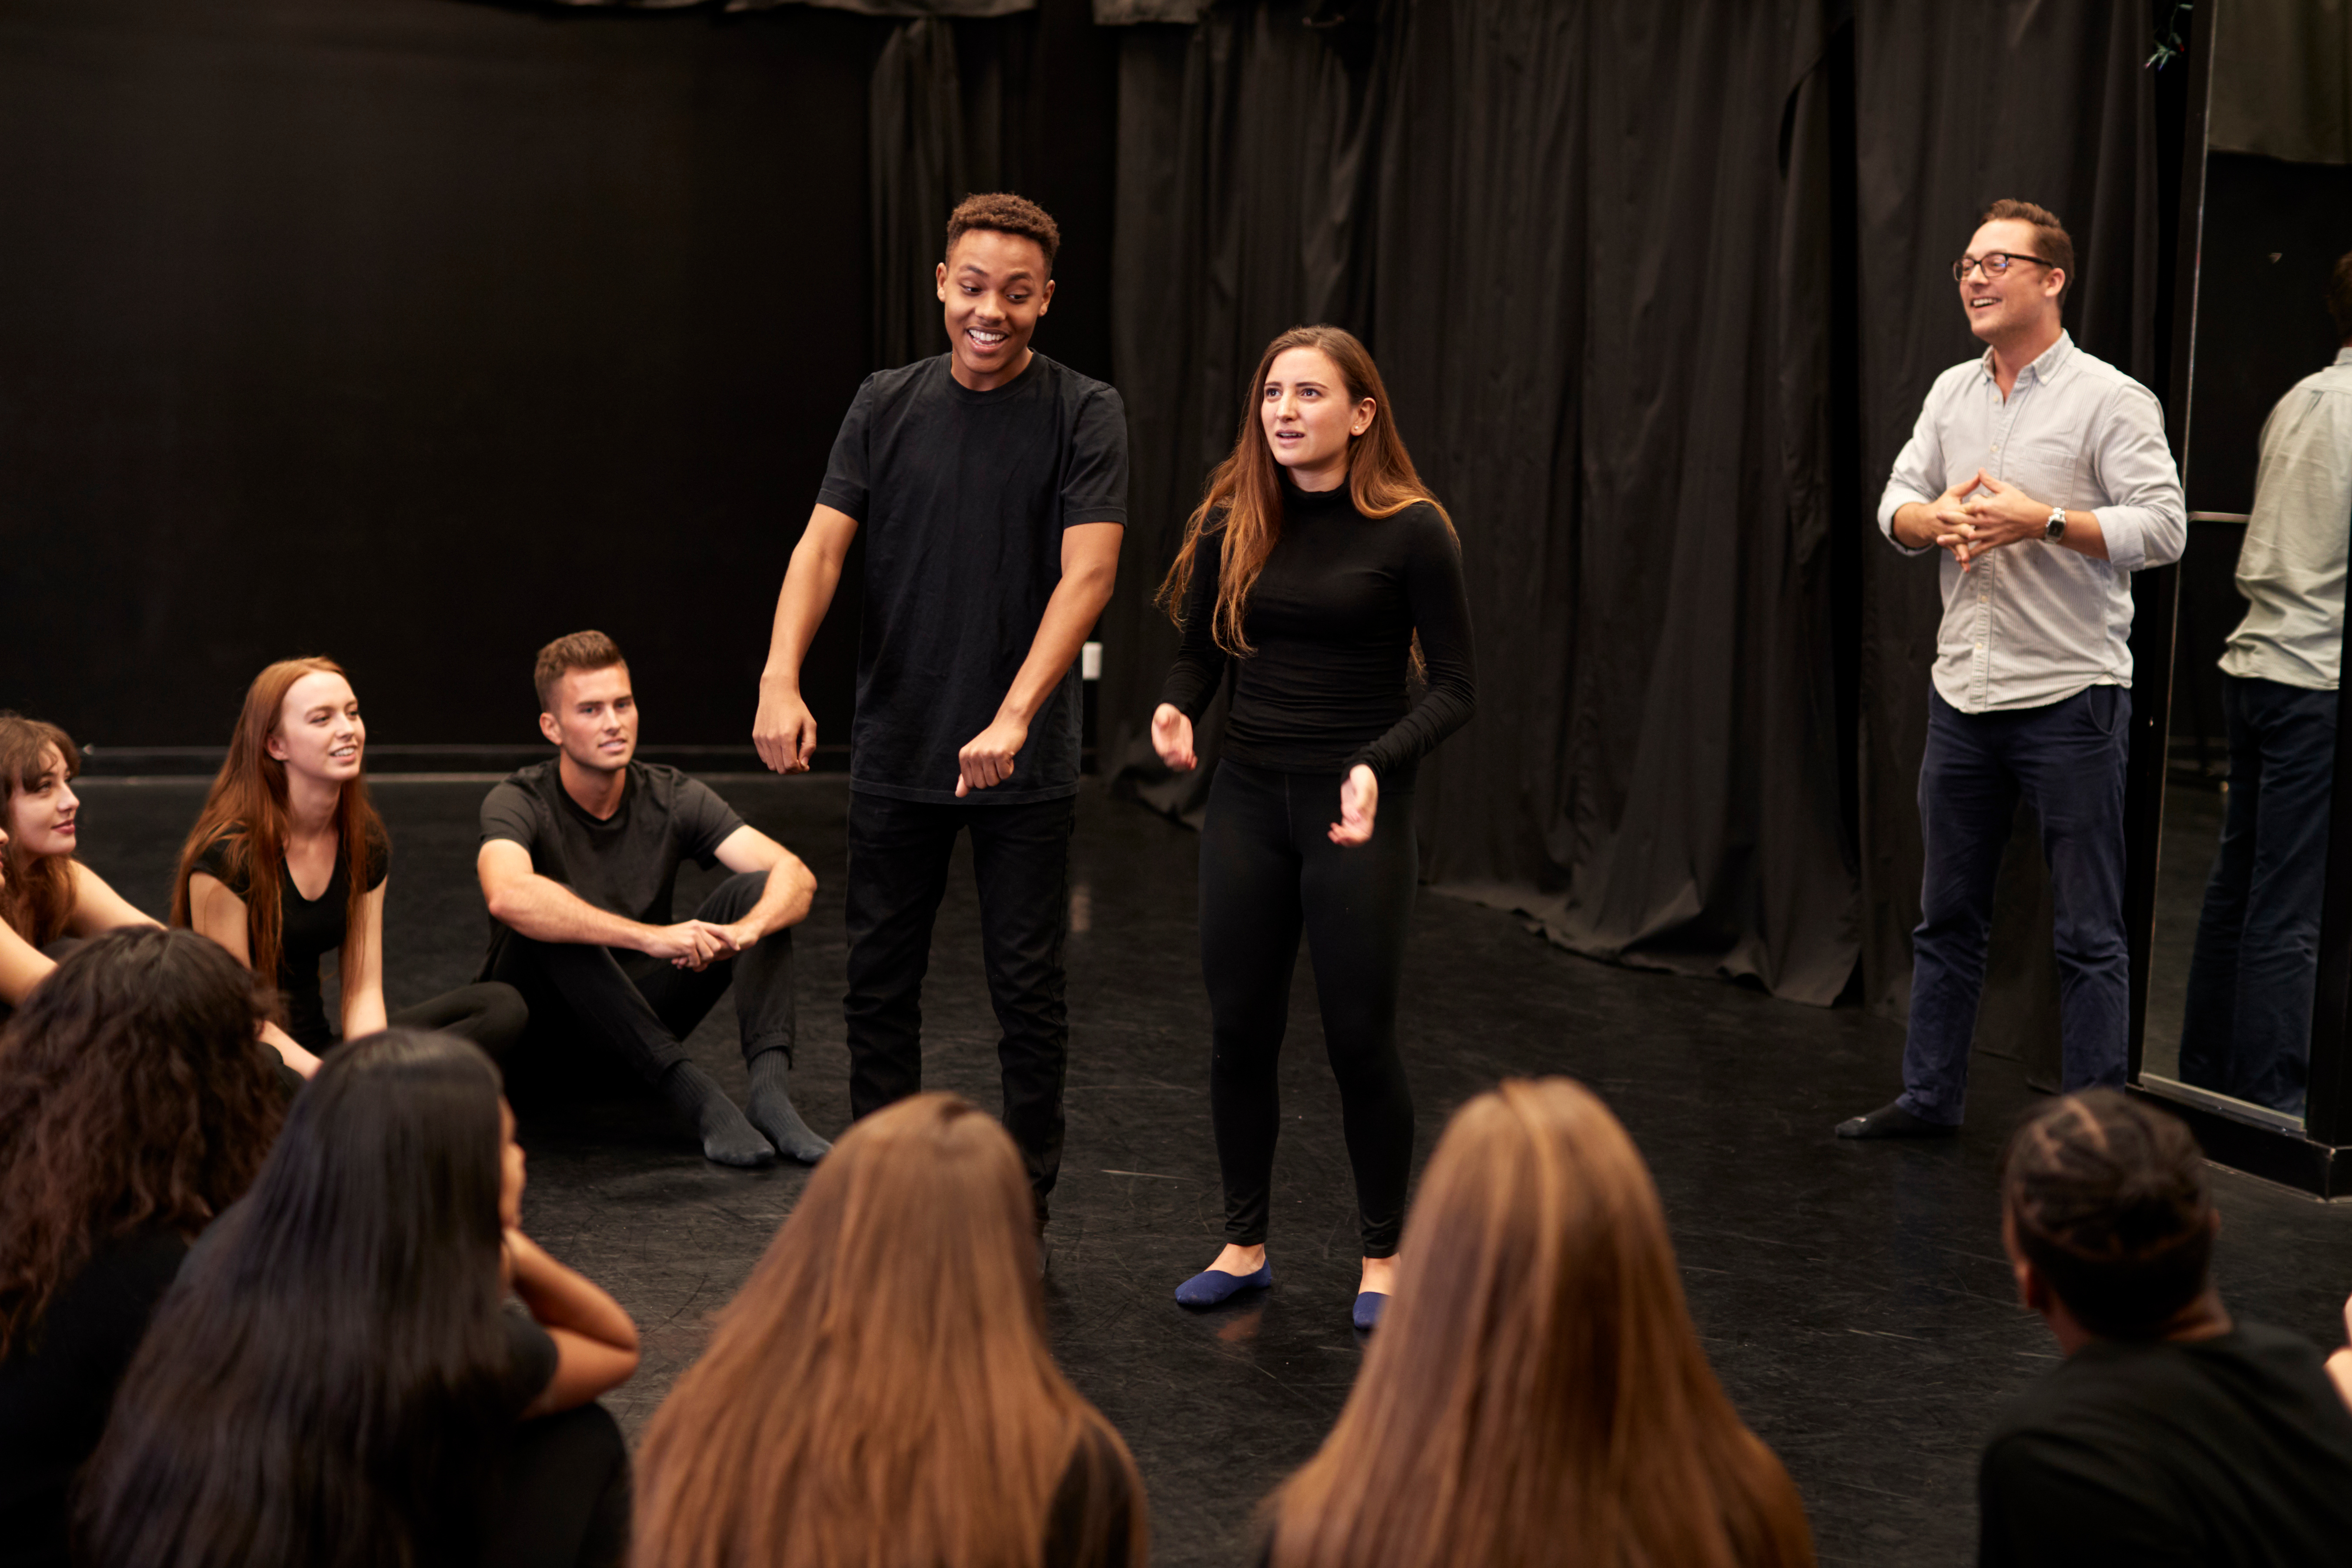 Image shows a high school acting class in a room with a black background. The students are all dressed in black and most are sitting in a circle on the floor with two standing in the middle doing improvisation while the other students and teacher watch.